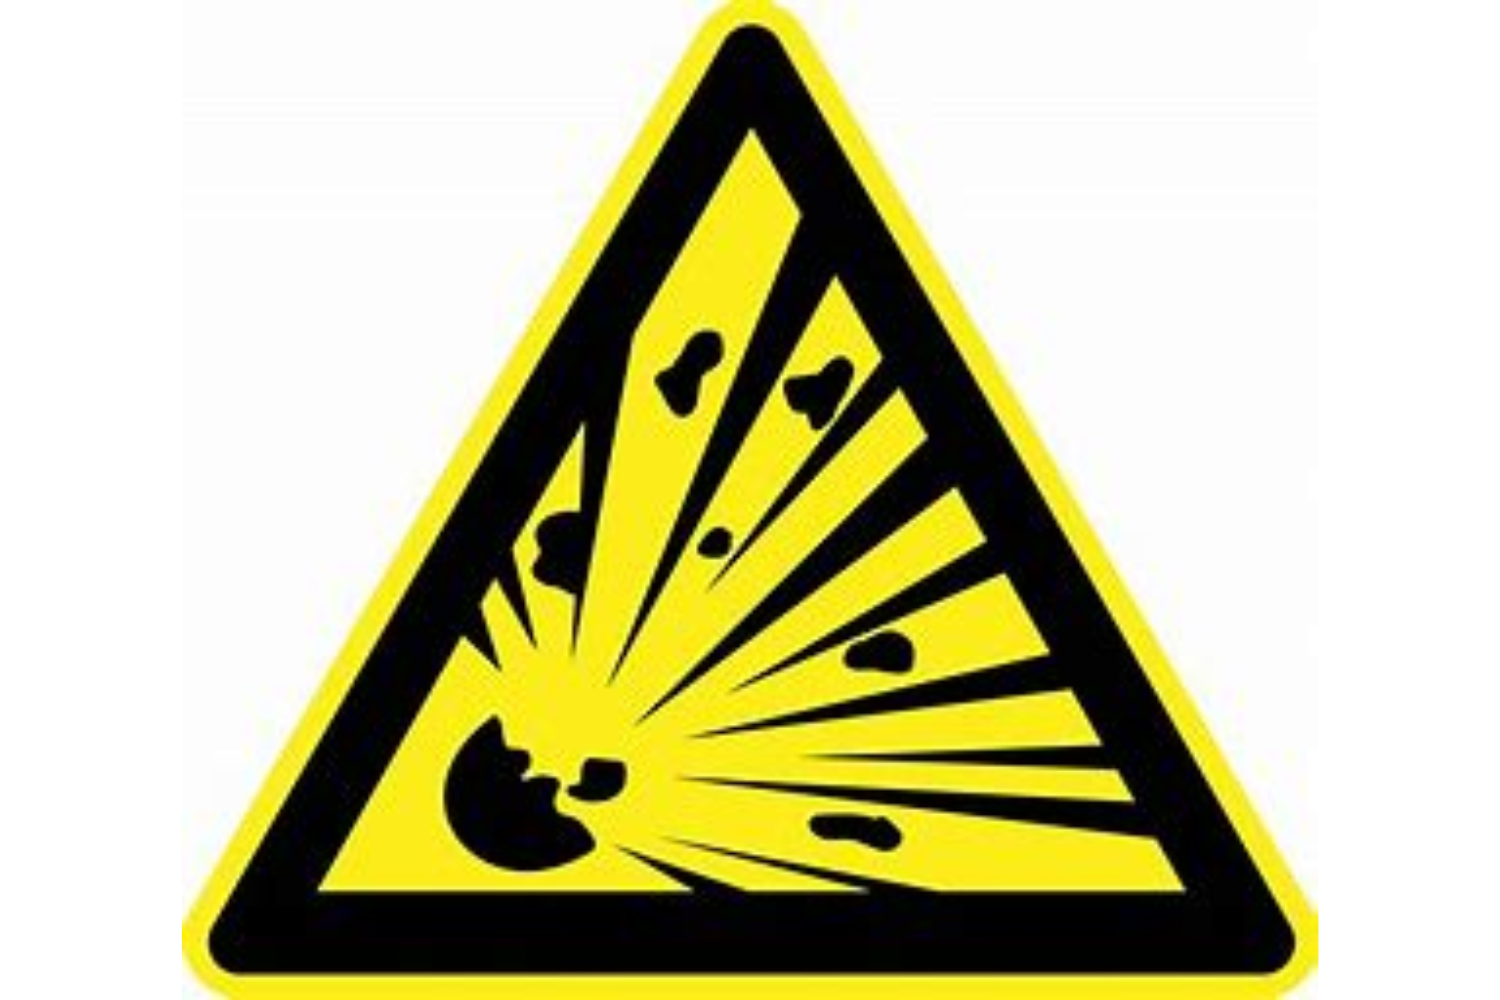 Yellow triangle sign showing an explosion